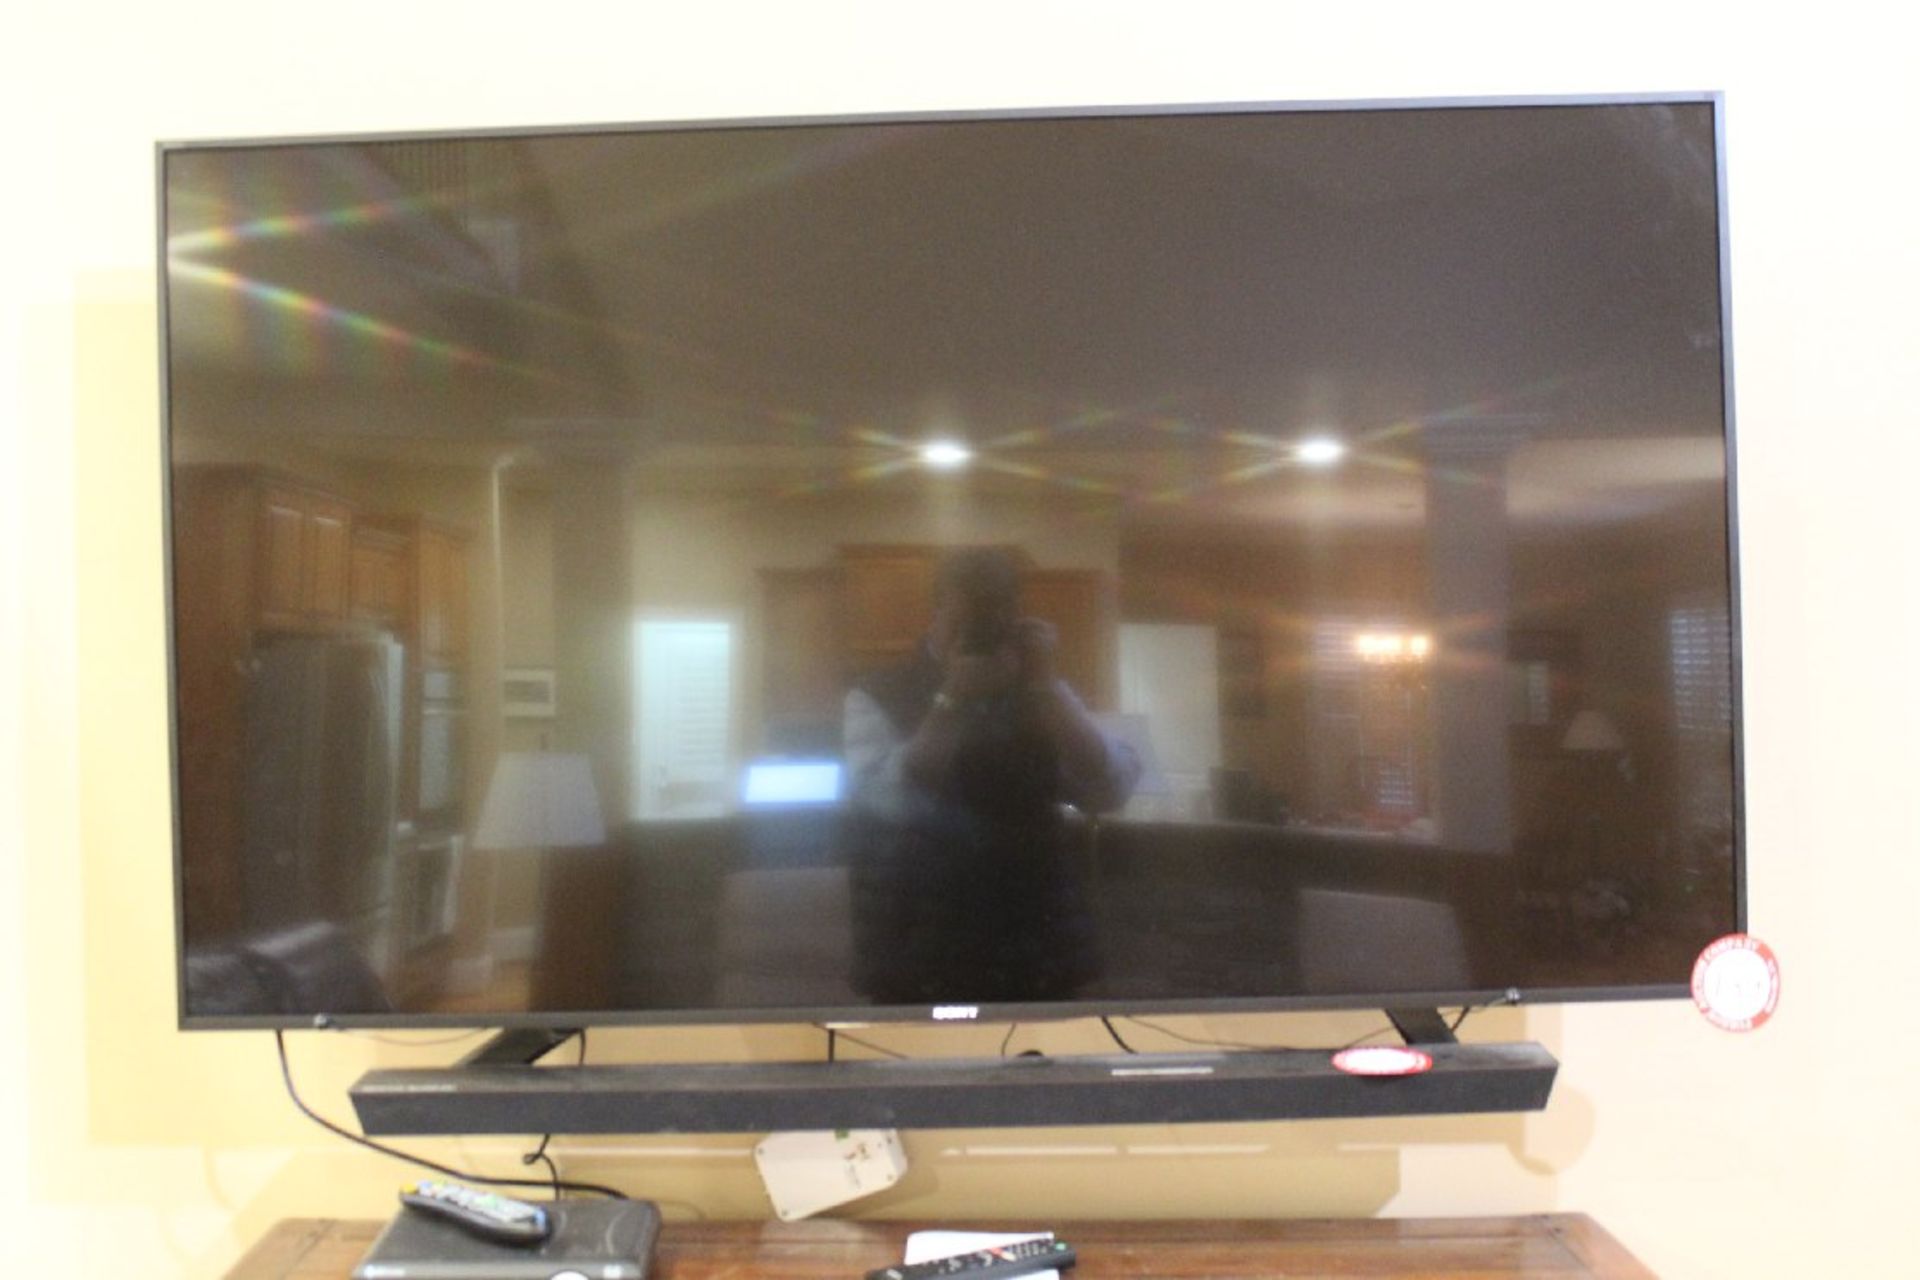 Sony Bravia 65" TV Model XBR-65X850D, with Definitive Technology Soundbar and Wall Mount - Image 2 of 4